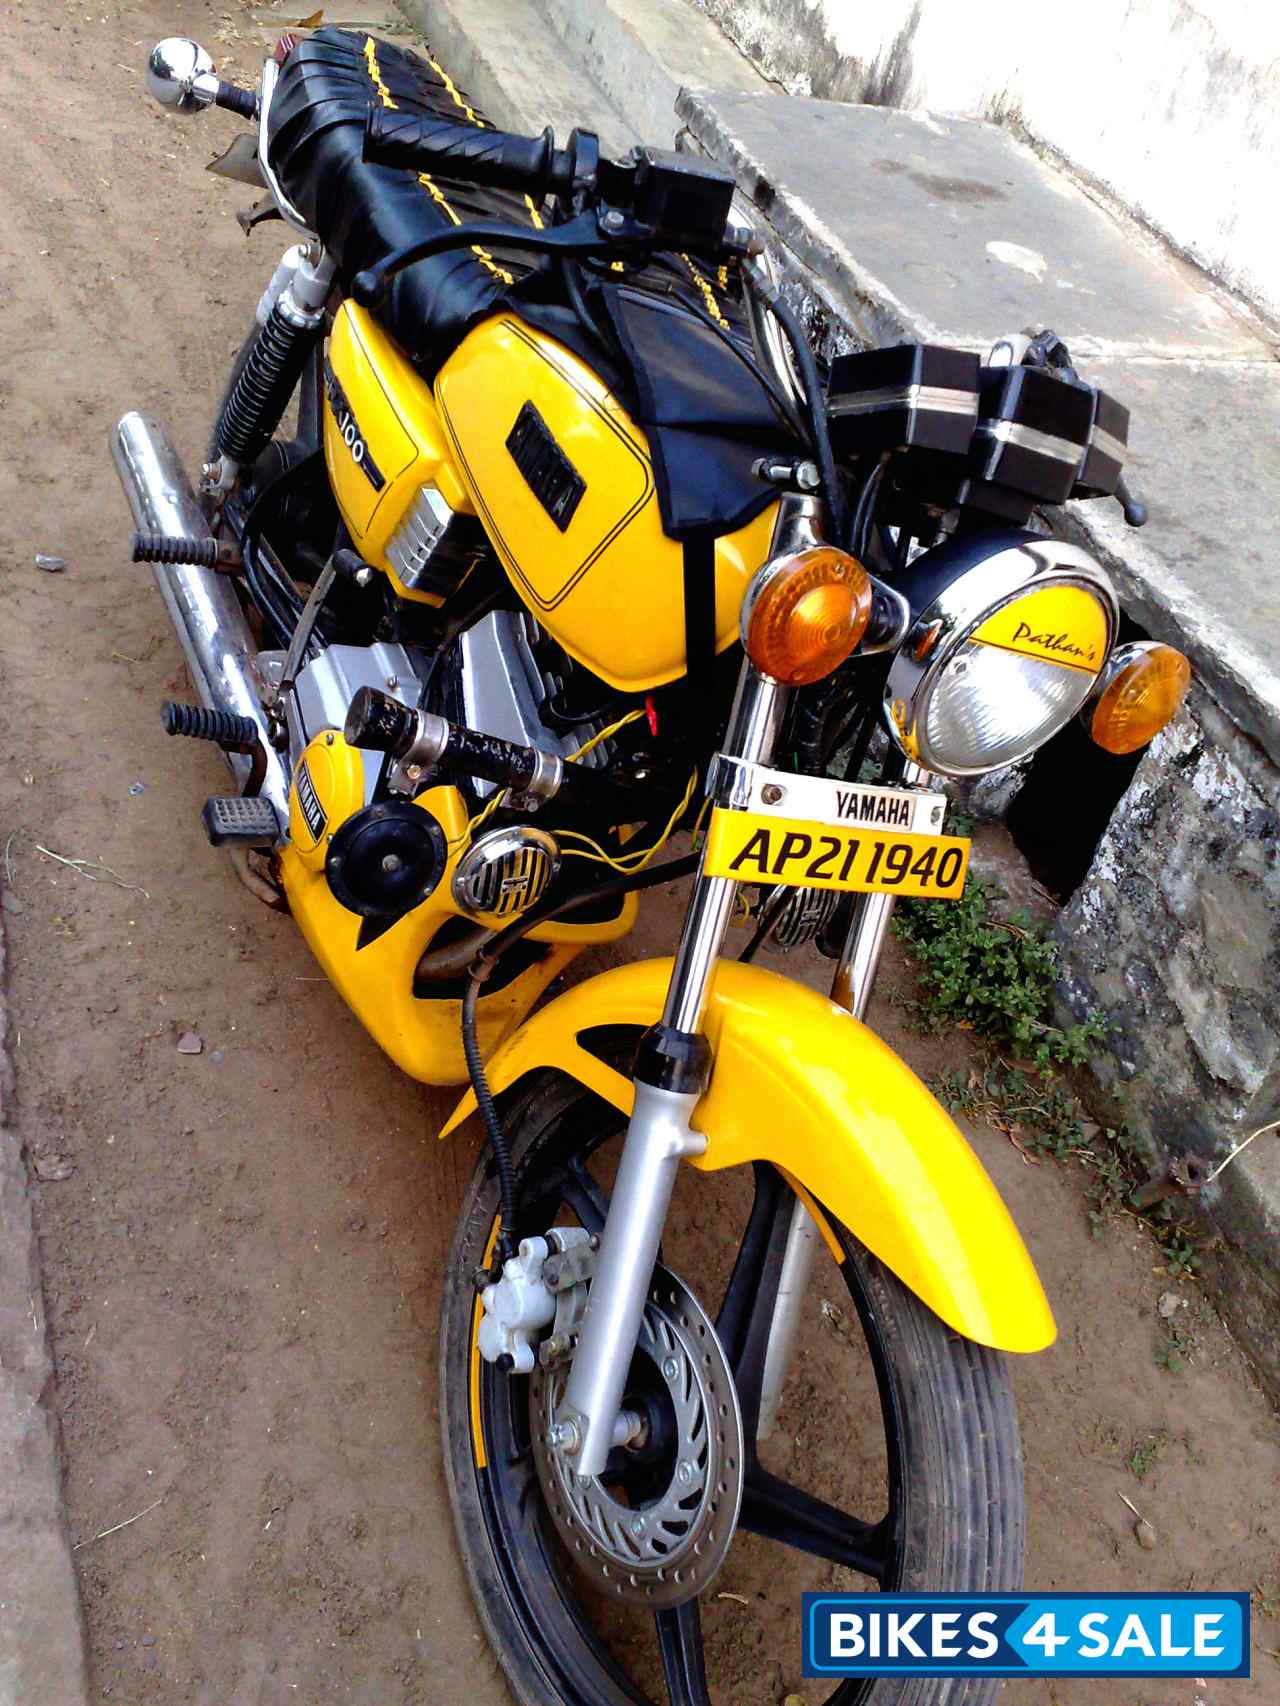 Used 1989 Model Yamaha Rx 100 For Sale In Guntur Id 24735 Yellow Colour Bikes4sale